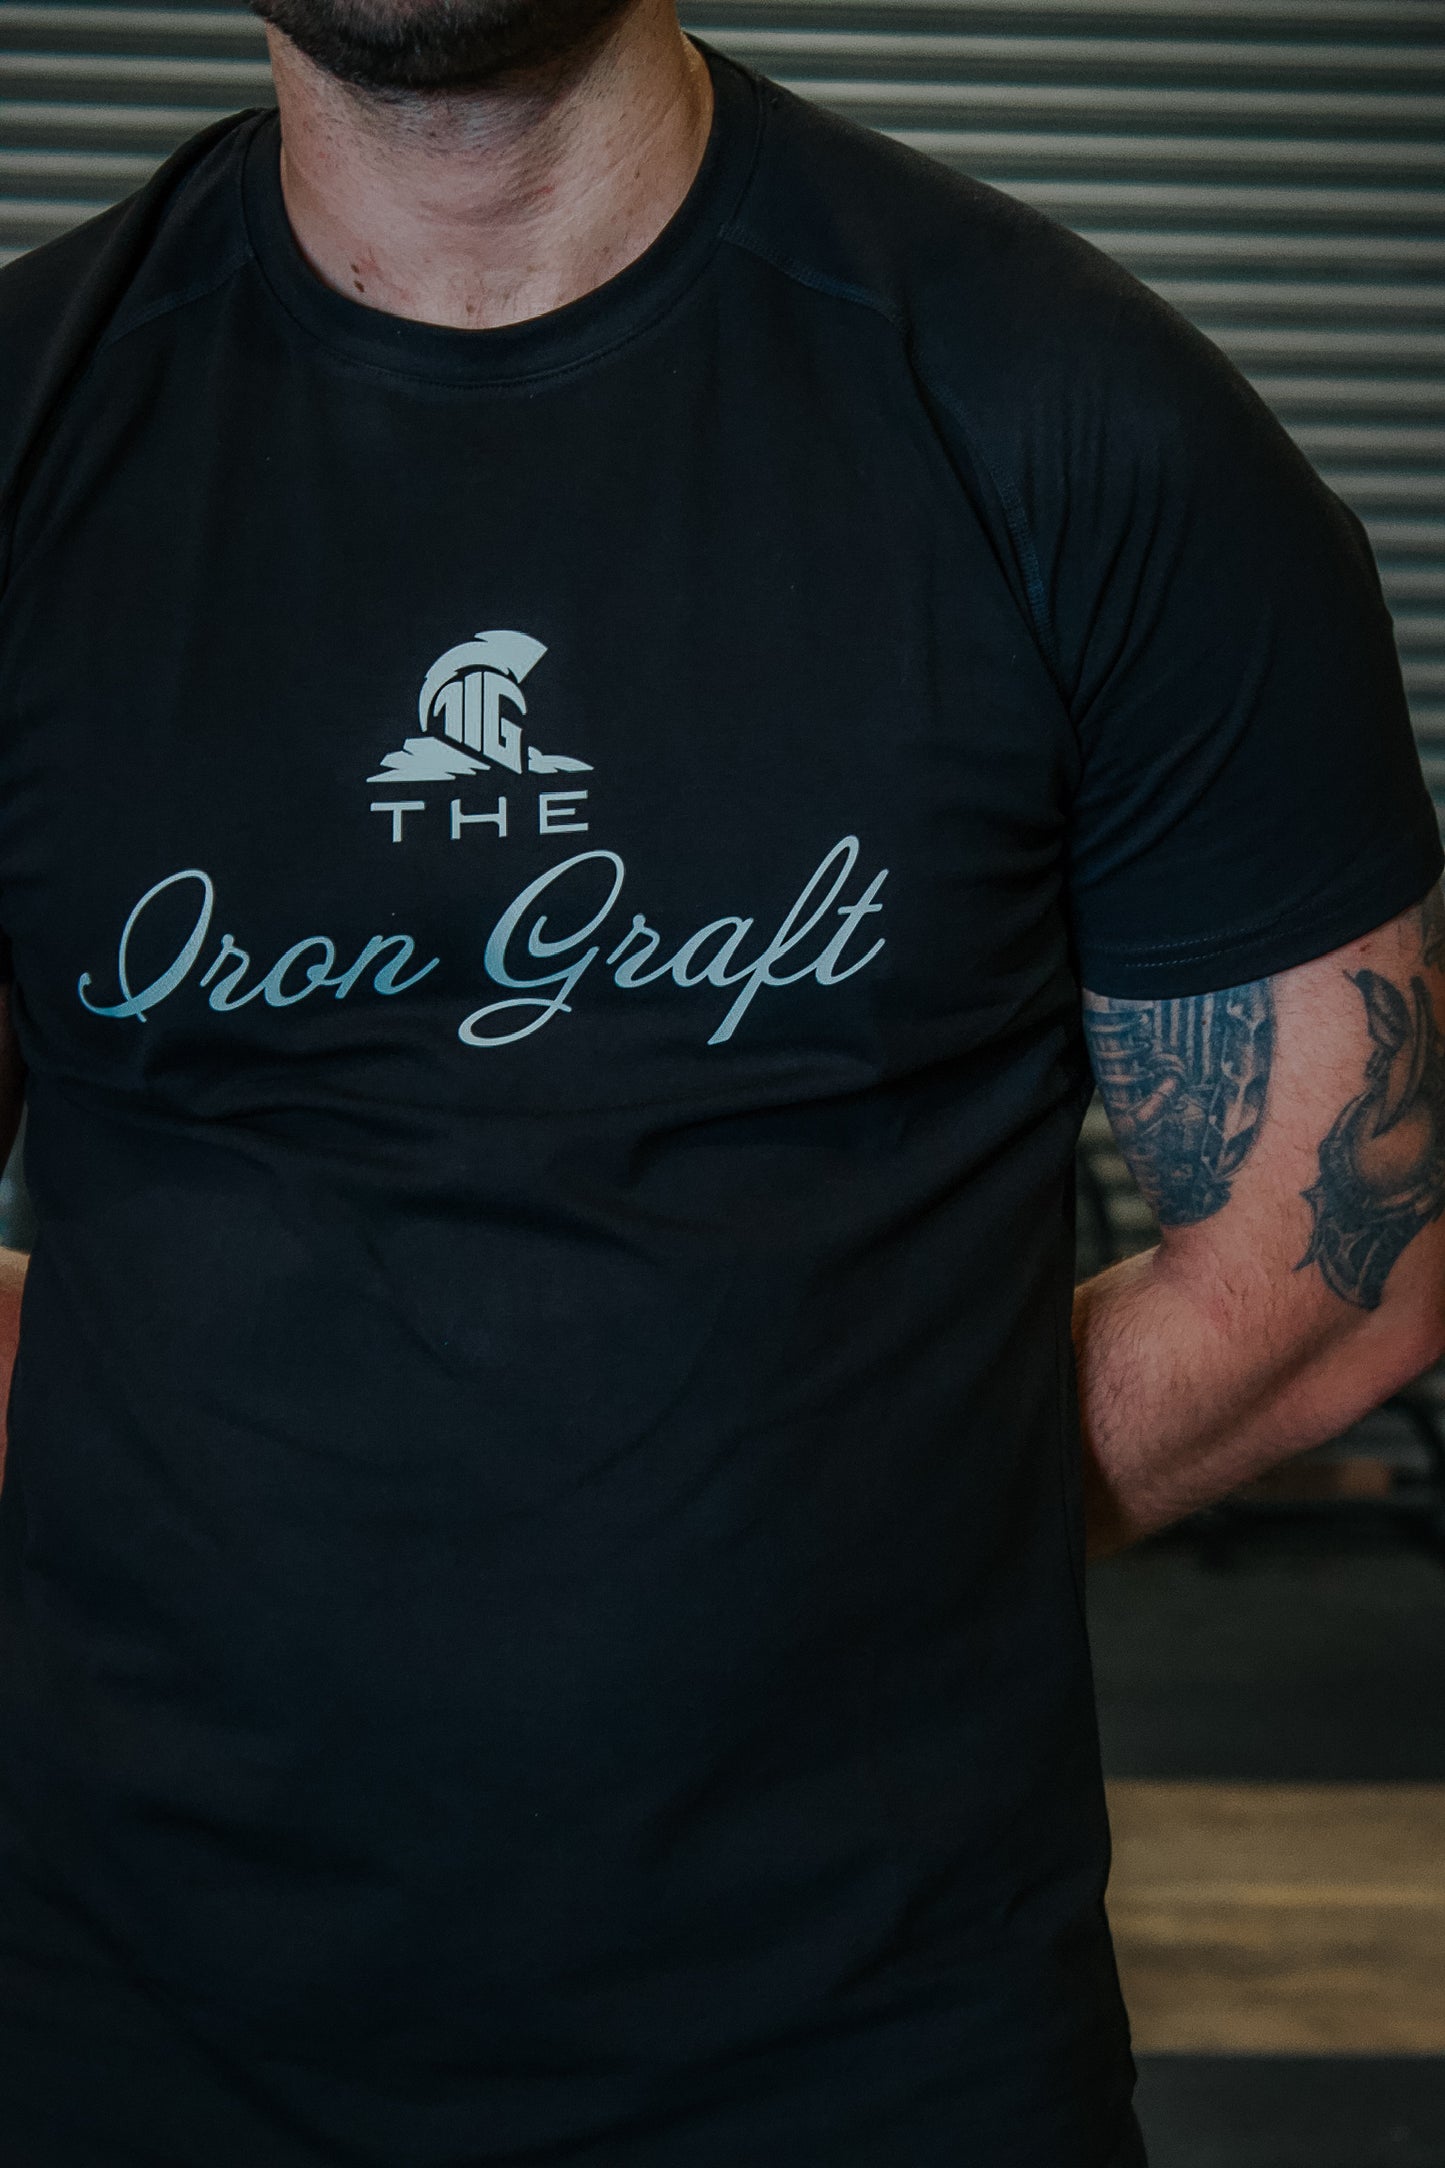 THE IRON GRAFT Muscle Fit T-Shirt - Black